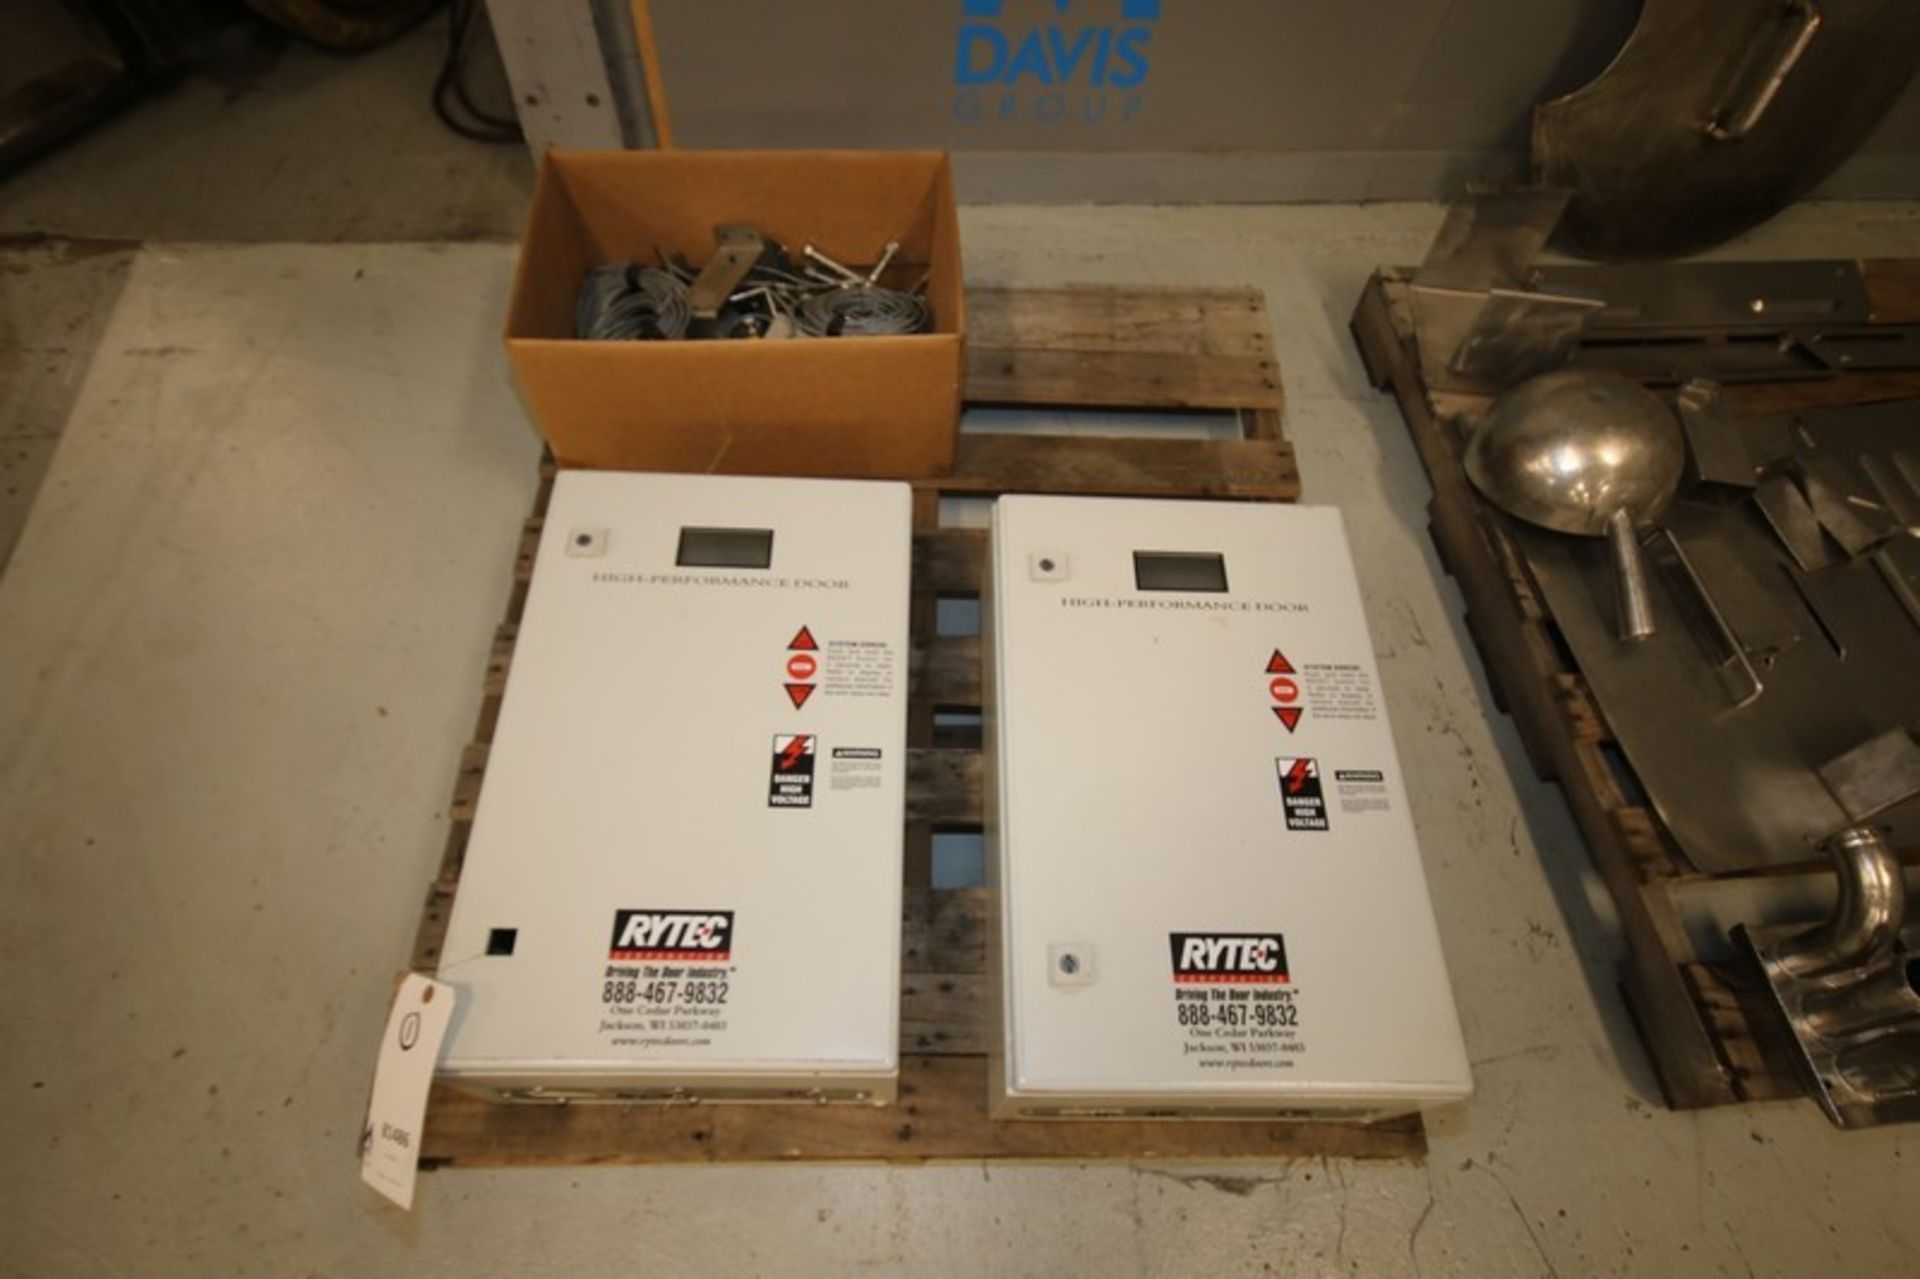 Lot of (2) Rytec Power Door Controllers with Sensors and Hardware (INV#81486)(Located @ the MDG